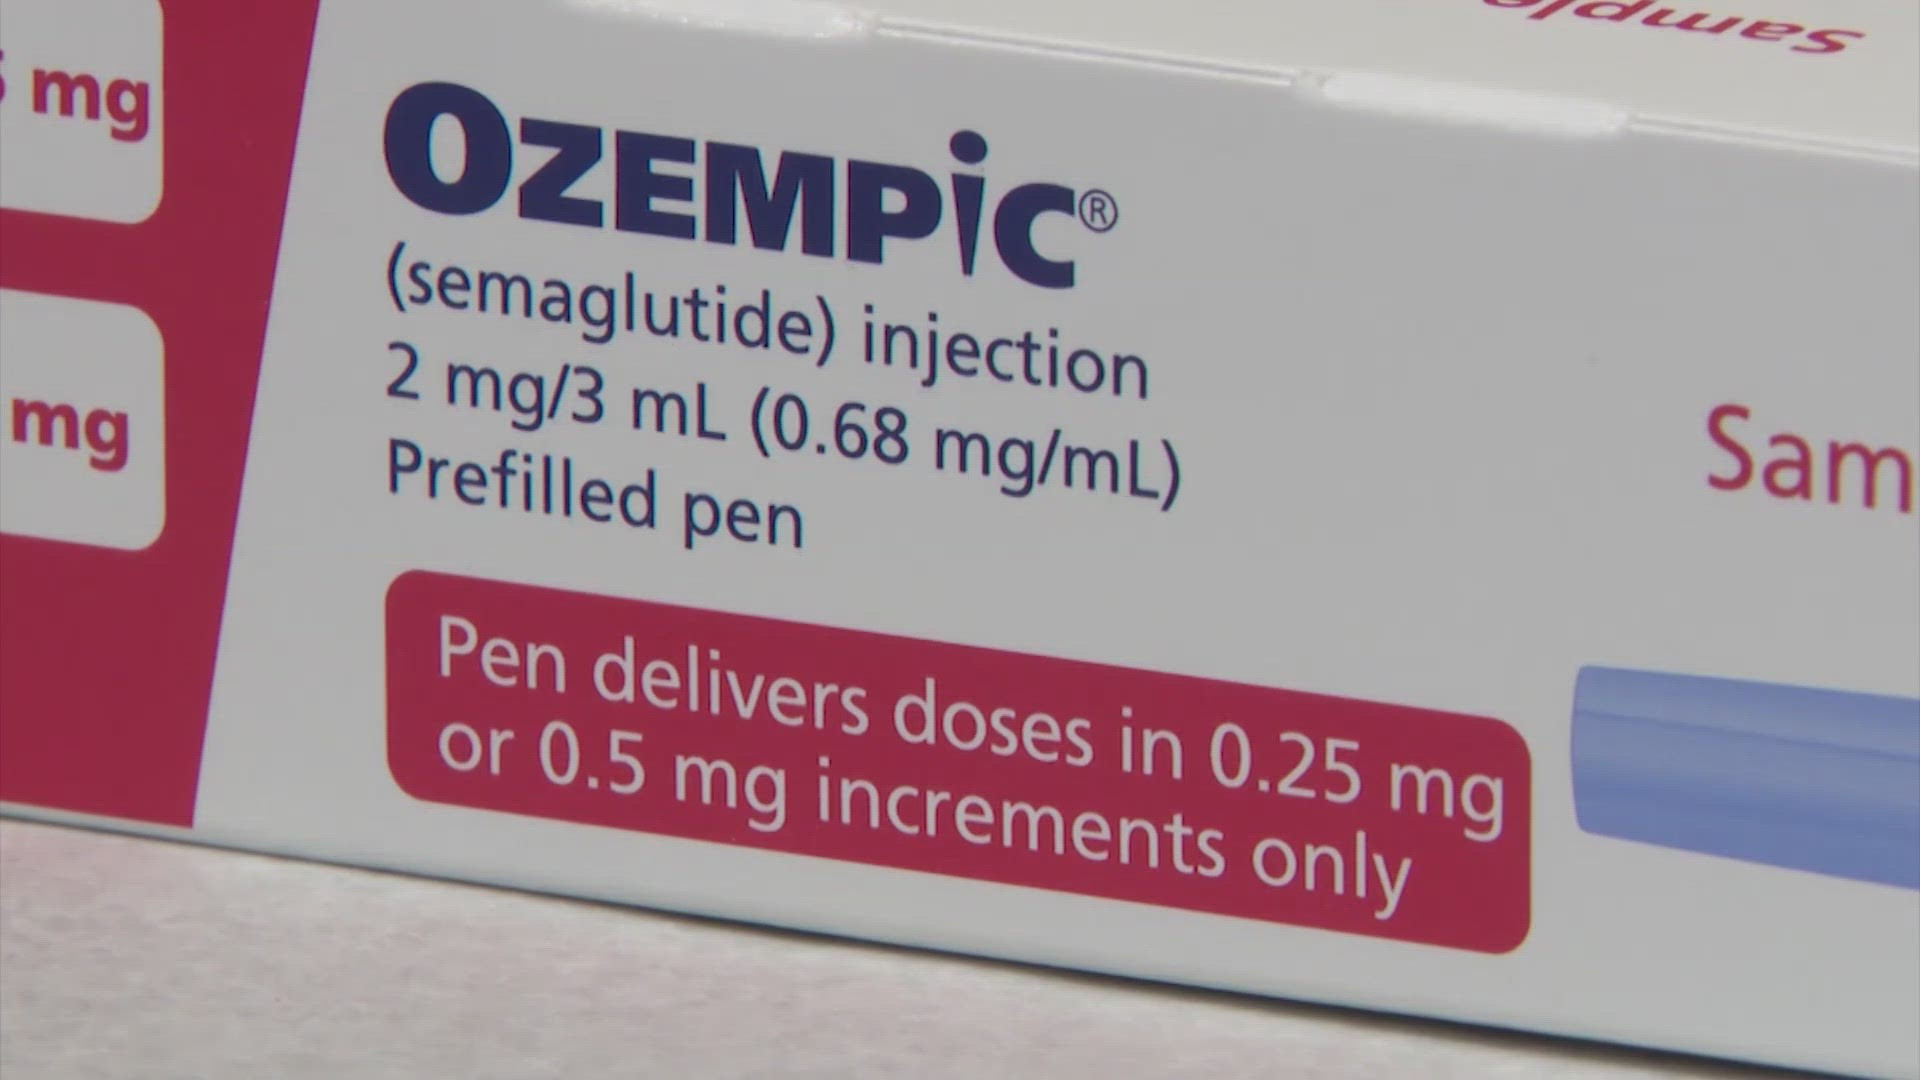 Taking Ozempic has become a trendy weight-loss solution for some but is causing a dangerous shortage for others.